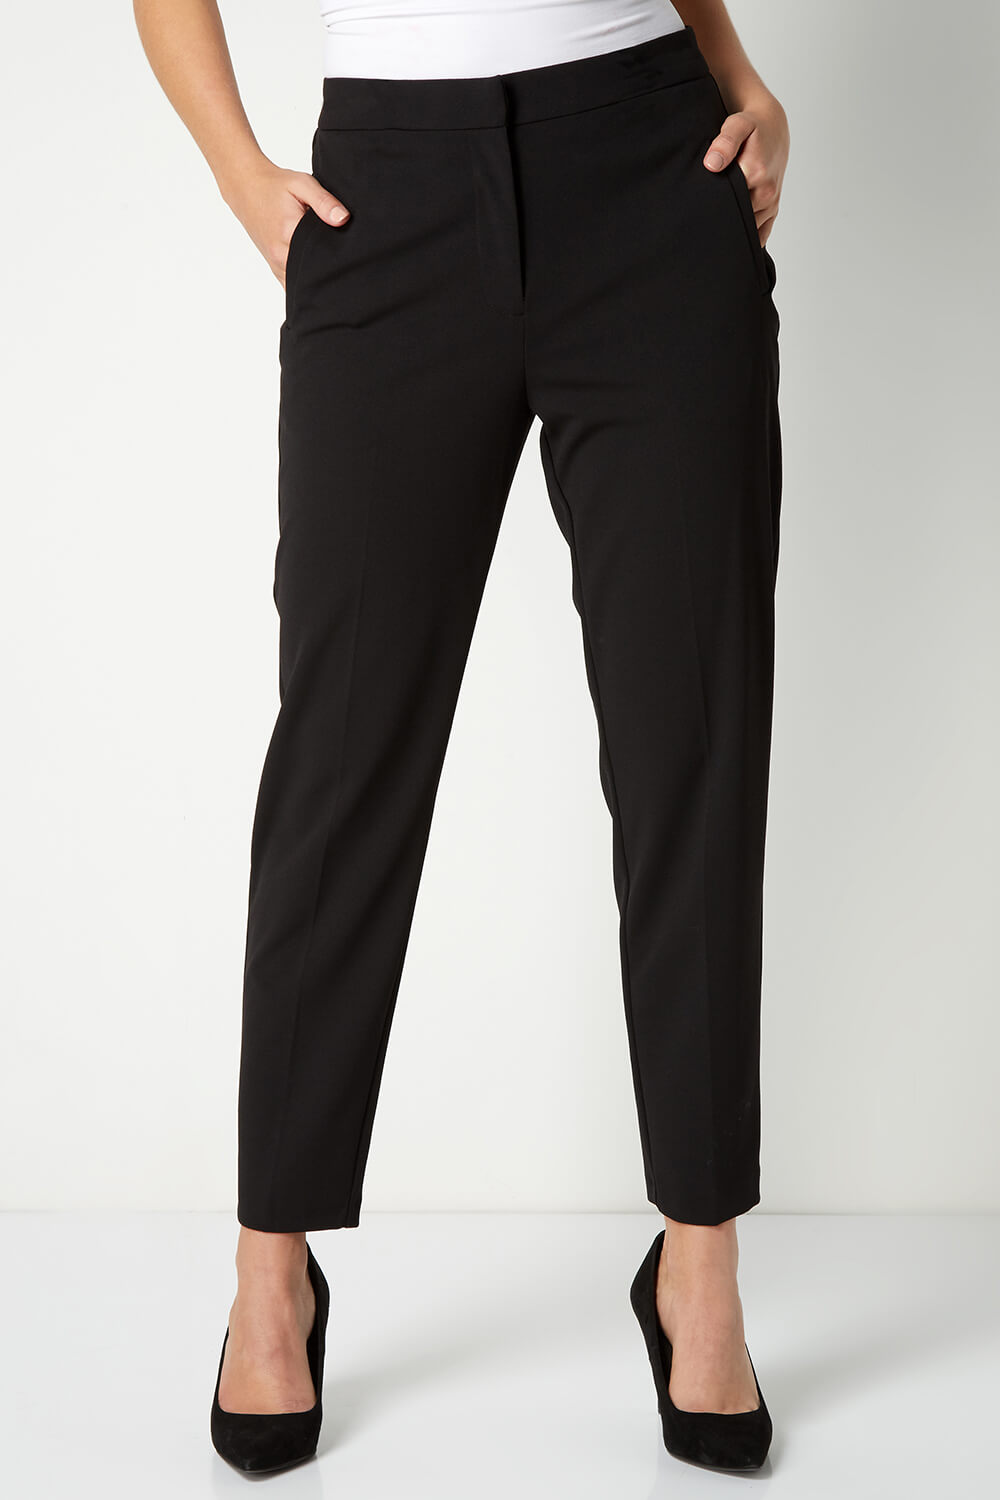 Black Linen Look High Waisted Tailored Trousers  PrettyLittleThing